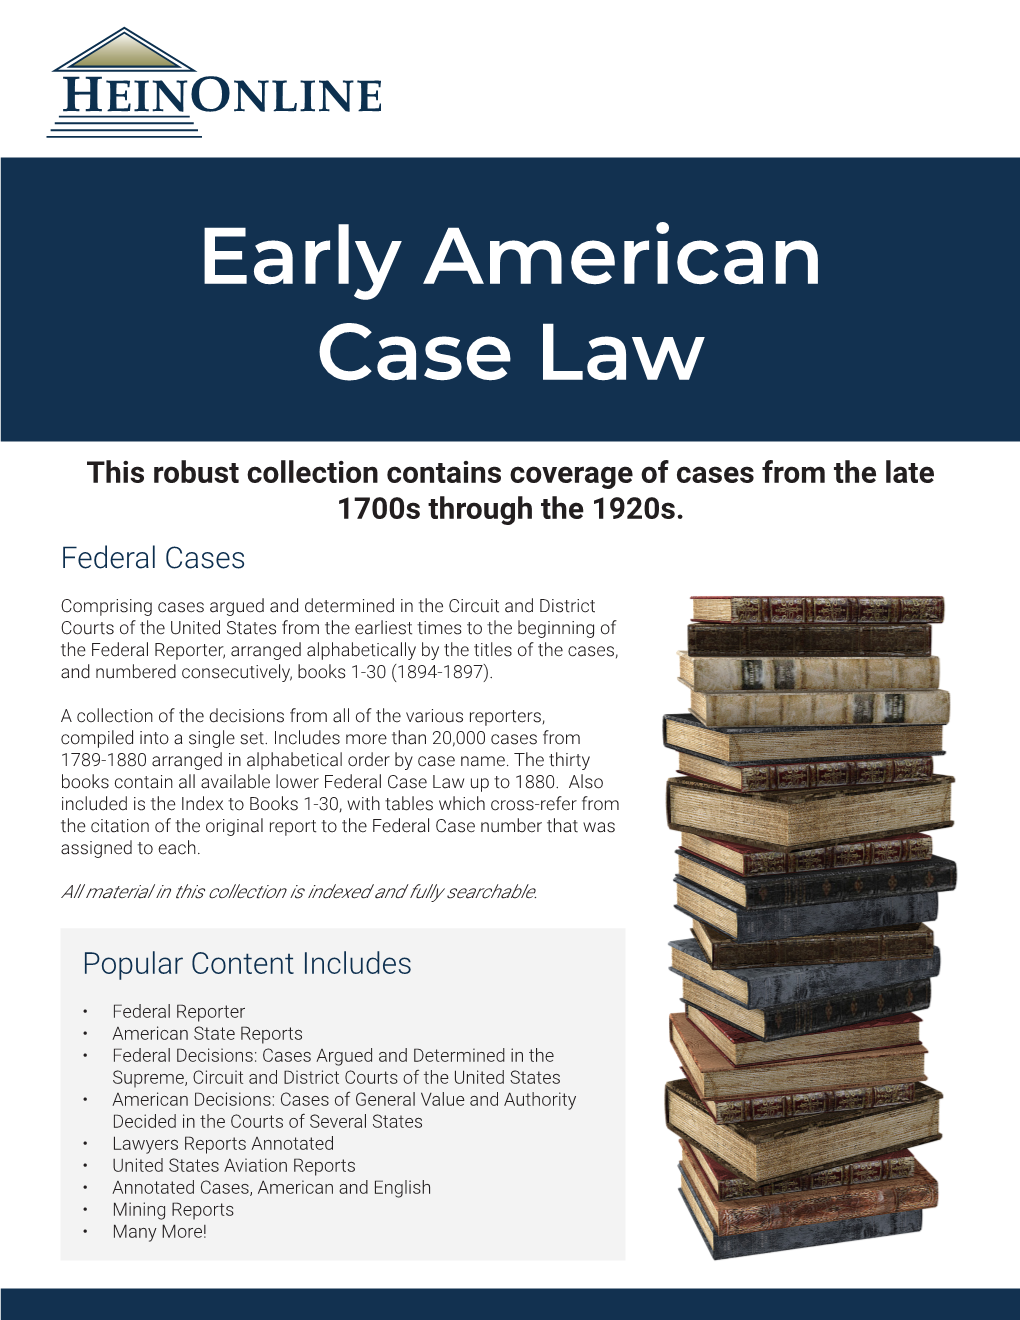 Early American Case Law